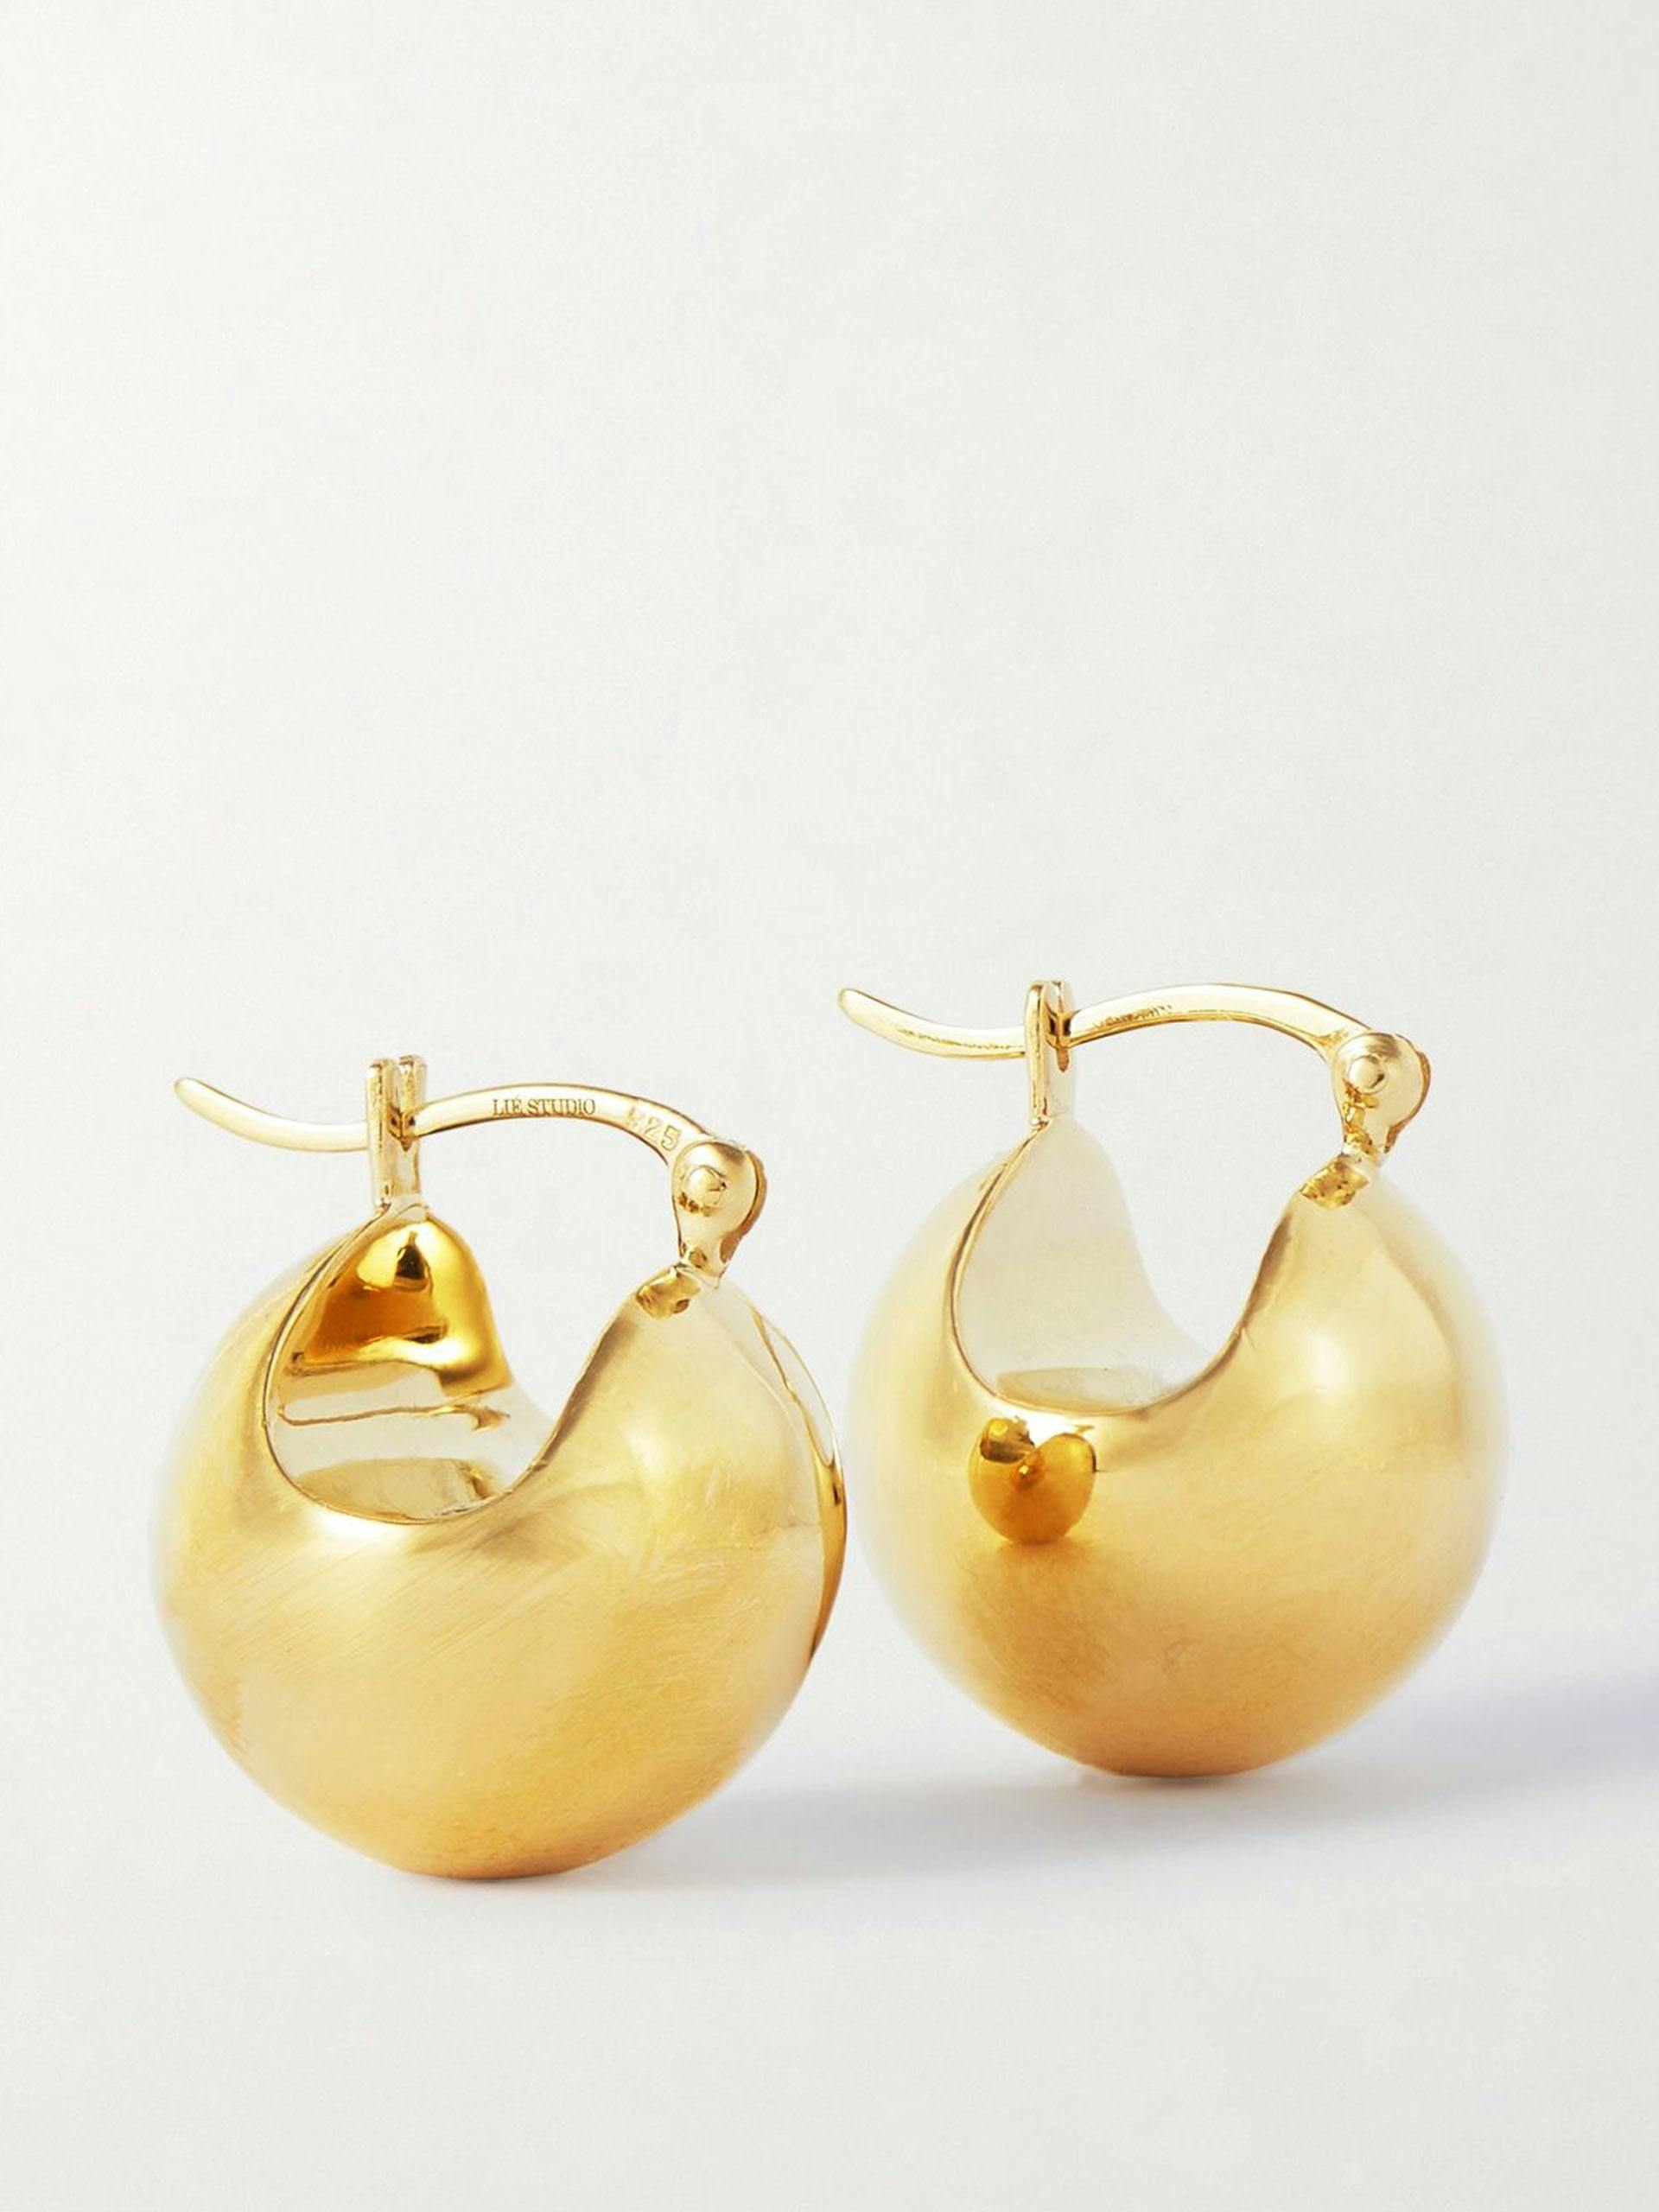 The Ingrid gold-plated earrings